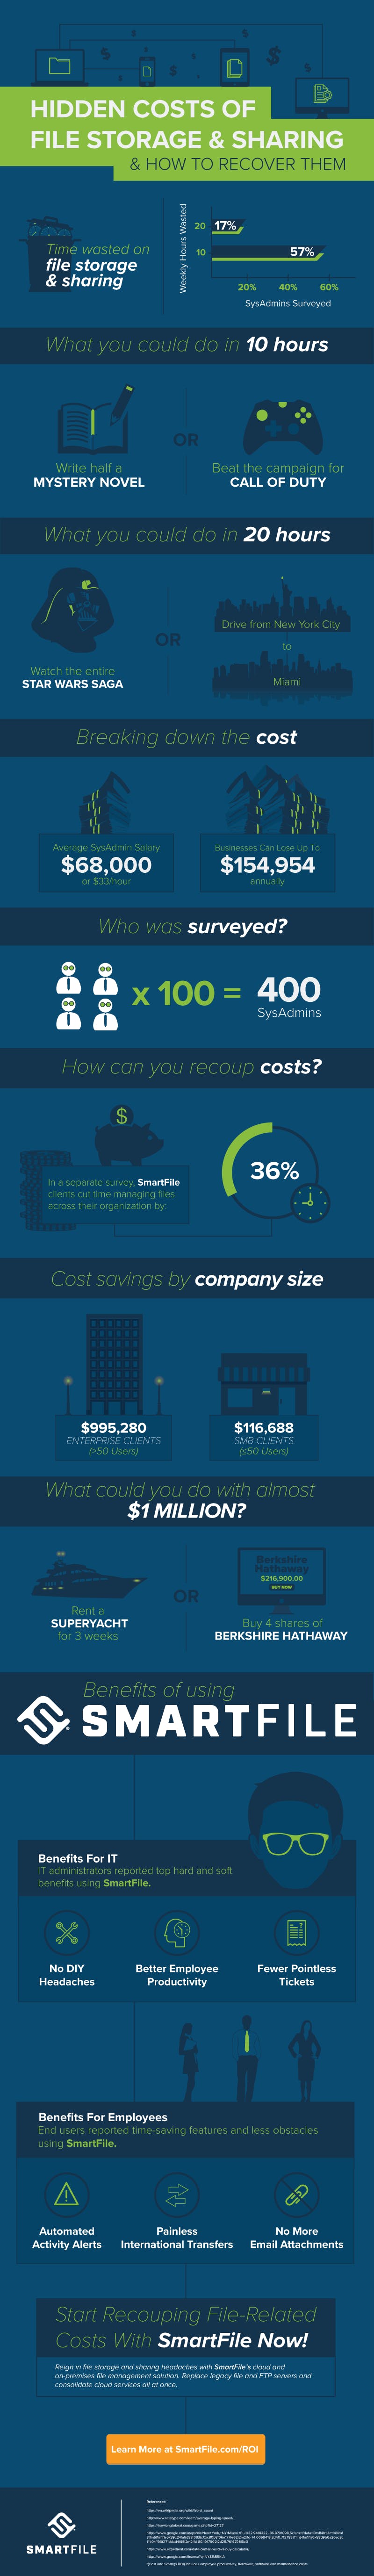 costs of file sharing